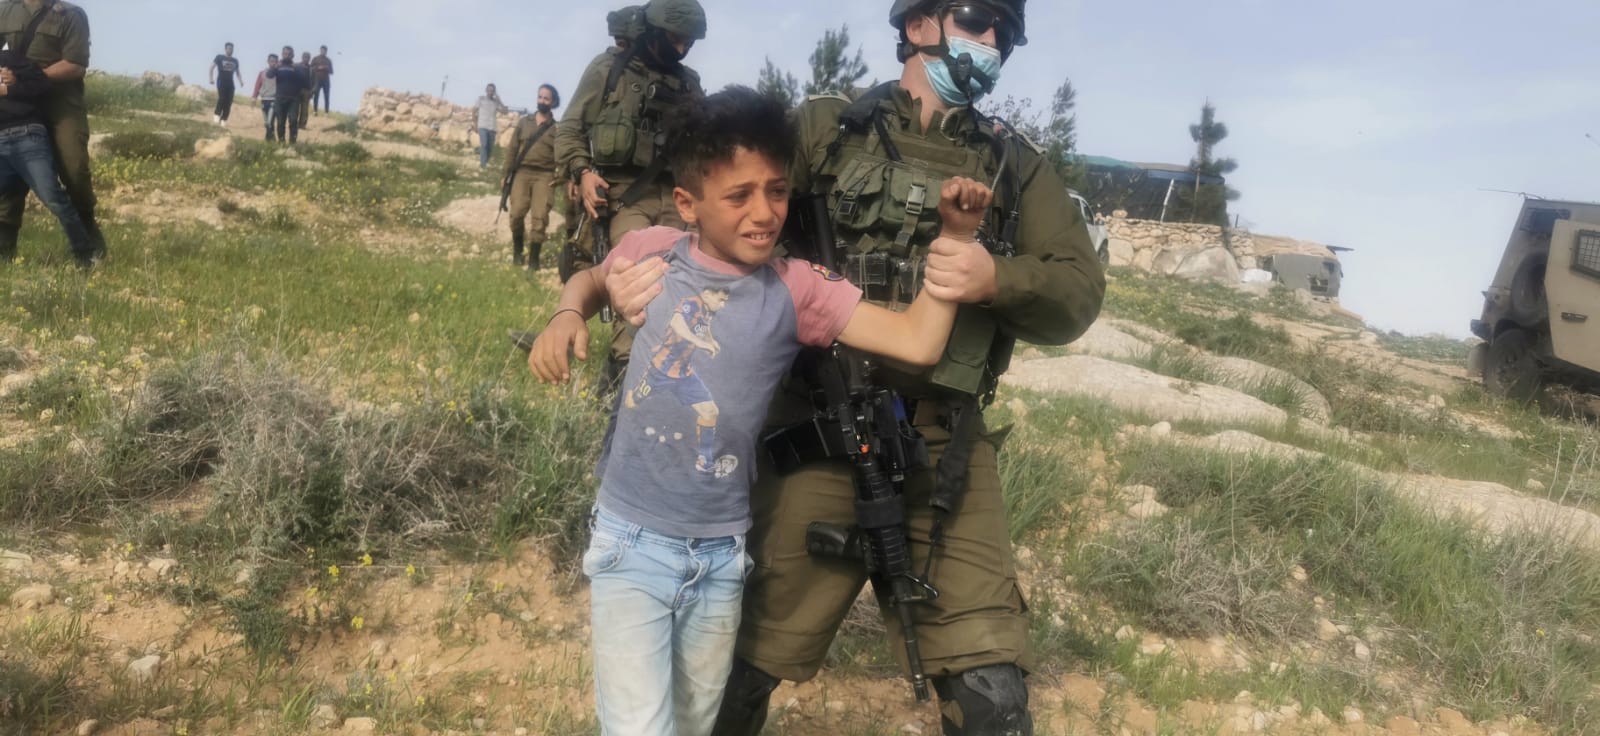 Marking the Palestinian Child Day, statistics show 140 children are detained in the Israeli prisons